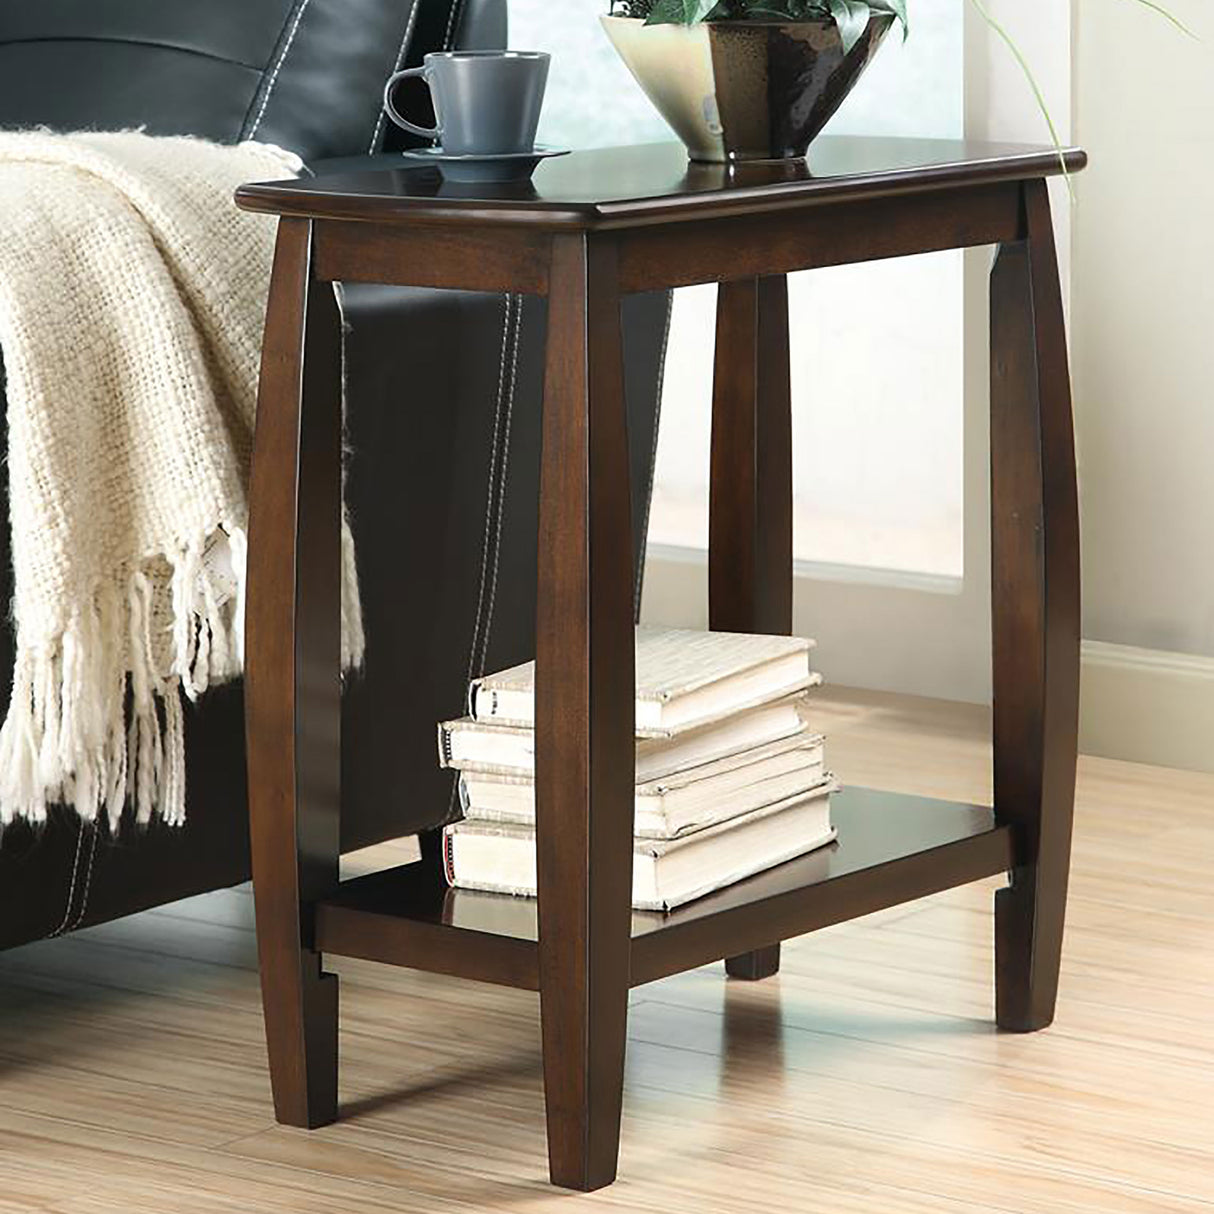 Side Table - Raphael 1-shelf Chairside Table Cappuccino